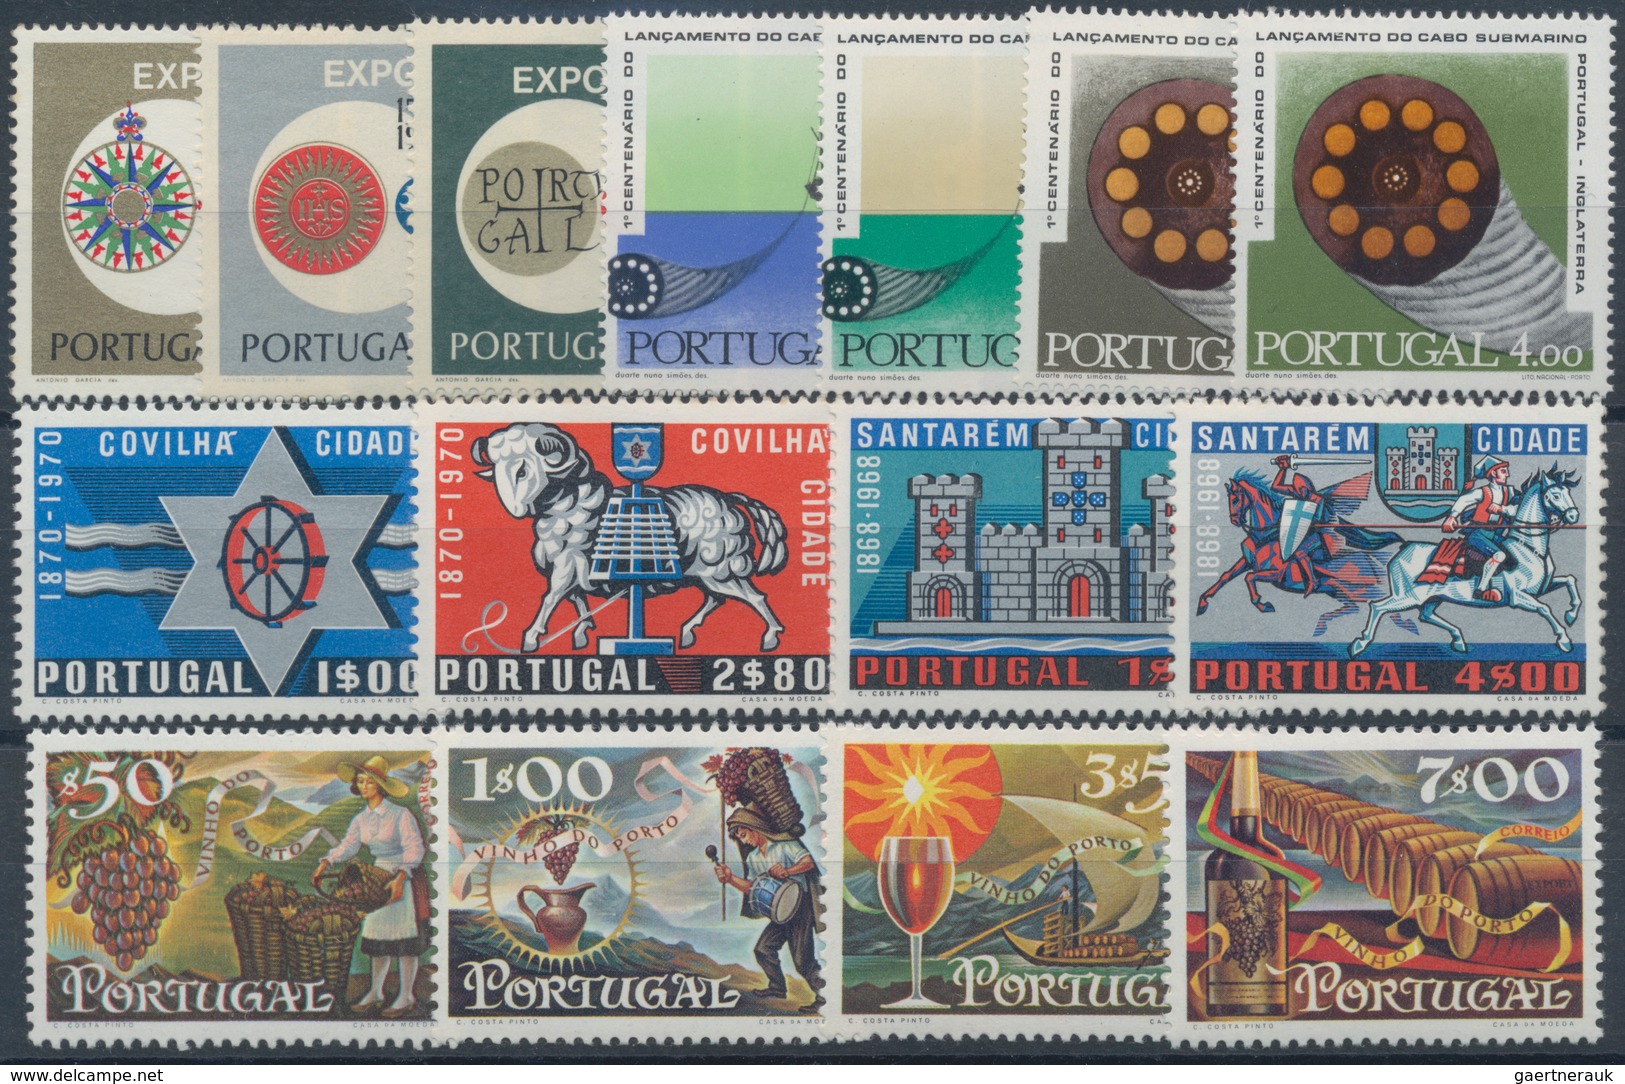 Portugal: 1940/1984, stock of stamps and complete year sets, mint never hinged, quite a few stamps m